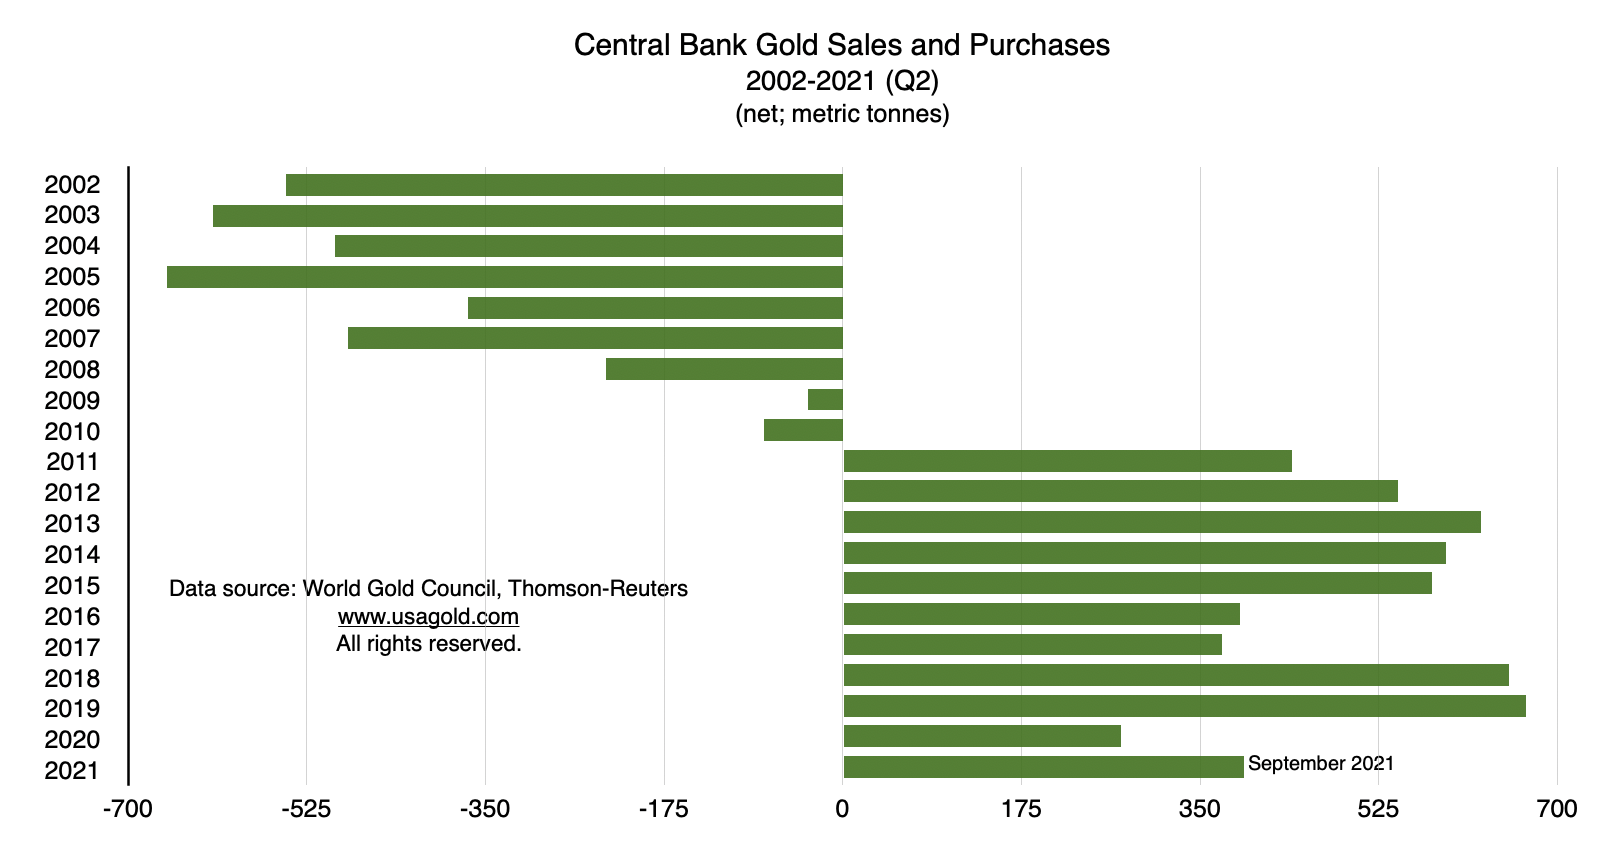 Bar chart showing central bank gold purchases and sales through Q3 2021